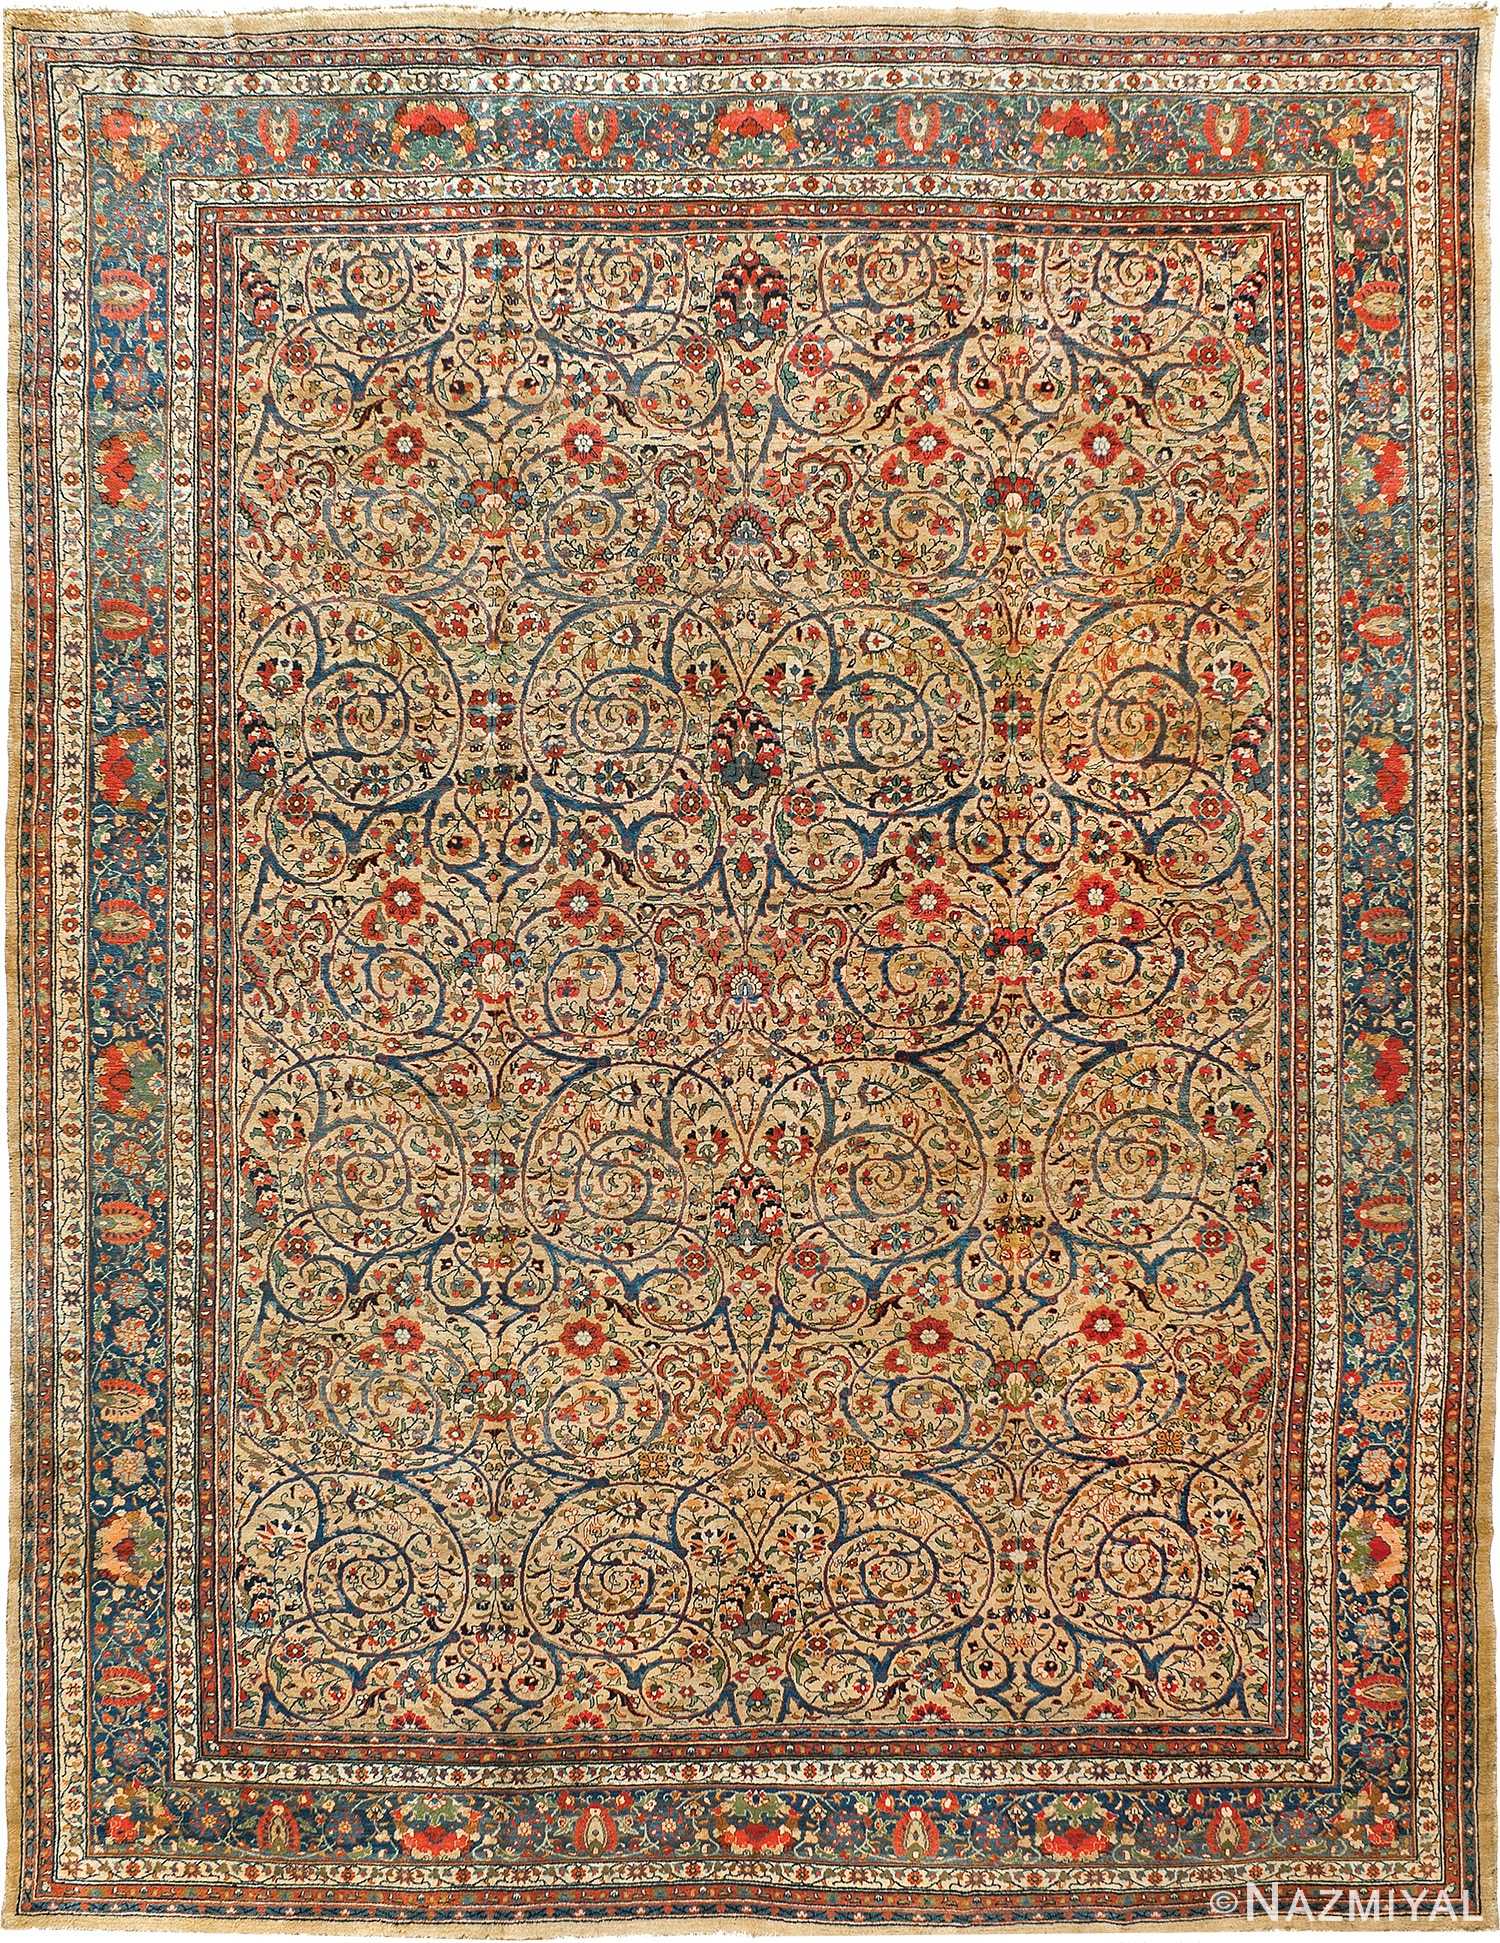 Fine Antique Room Size Persian Tabriz Area Rug #90032 by Nazmiyal Antique Rugs